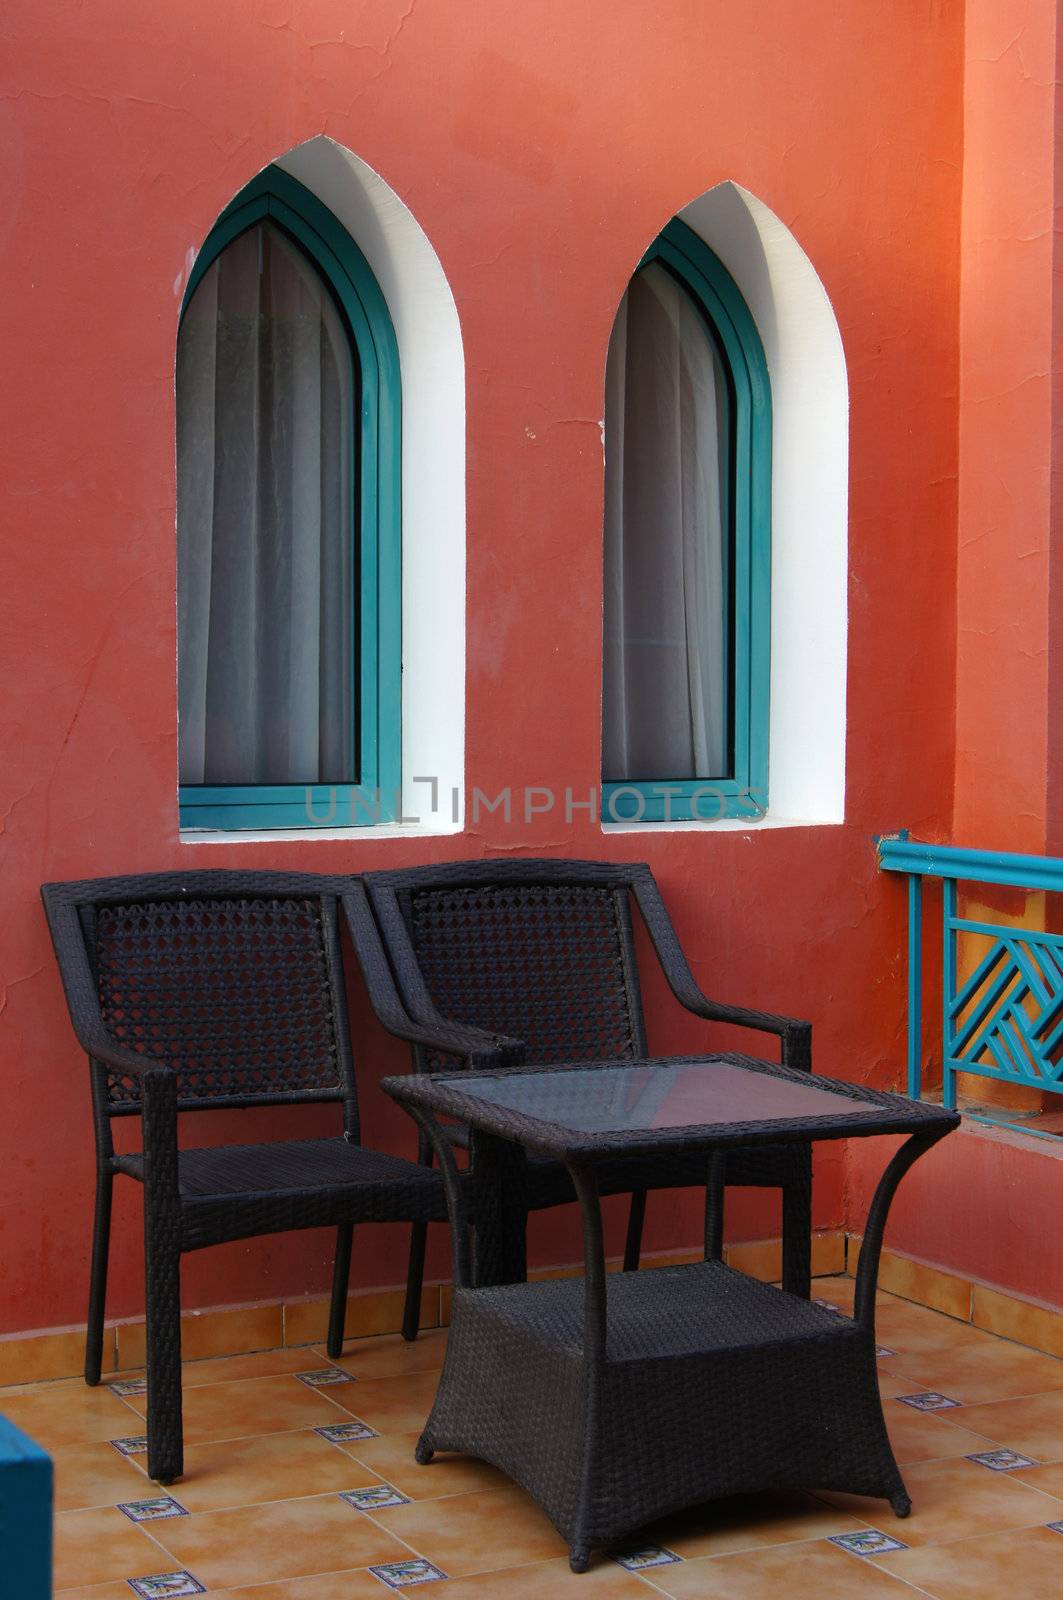 Arabic architecture: terrace with table and chairs            